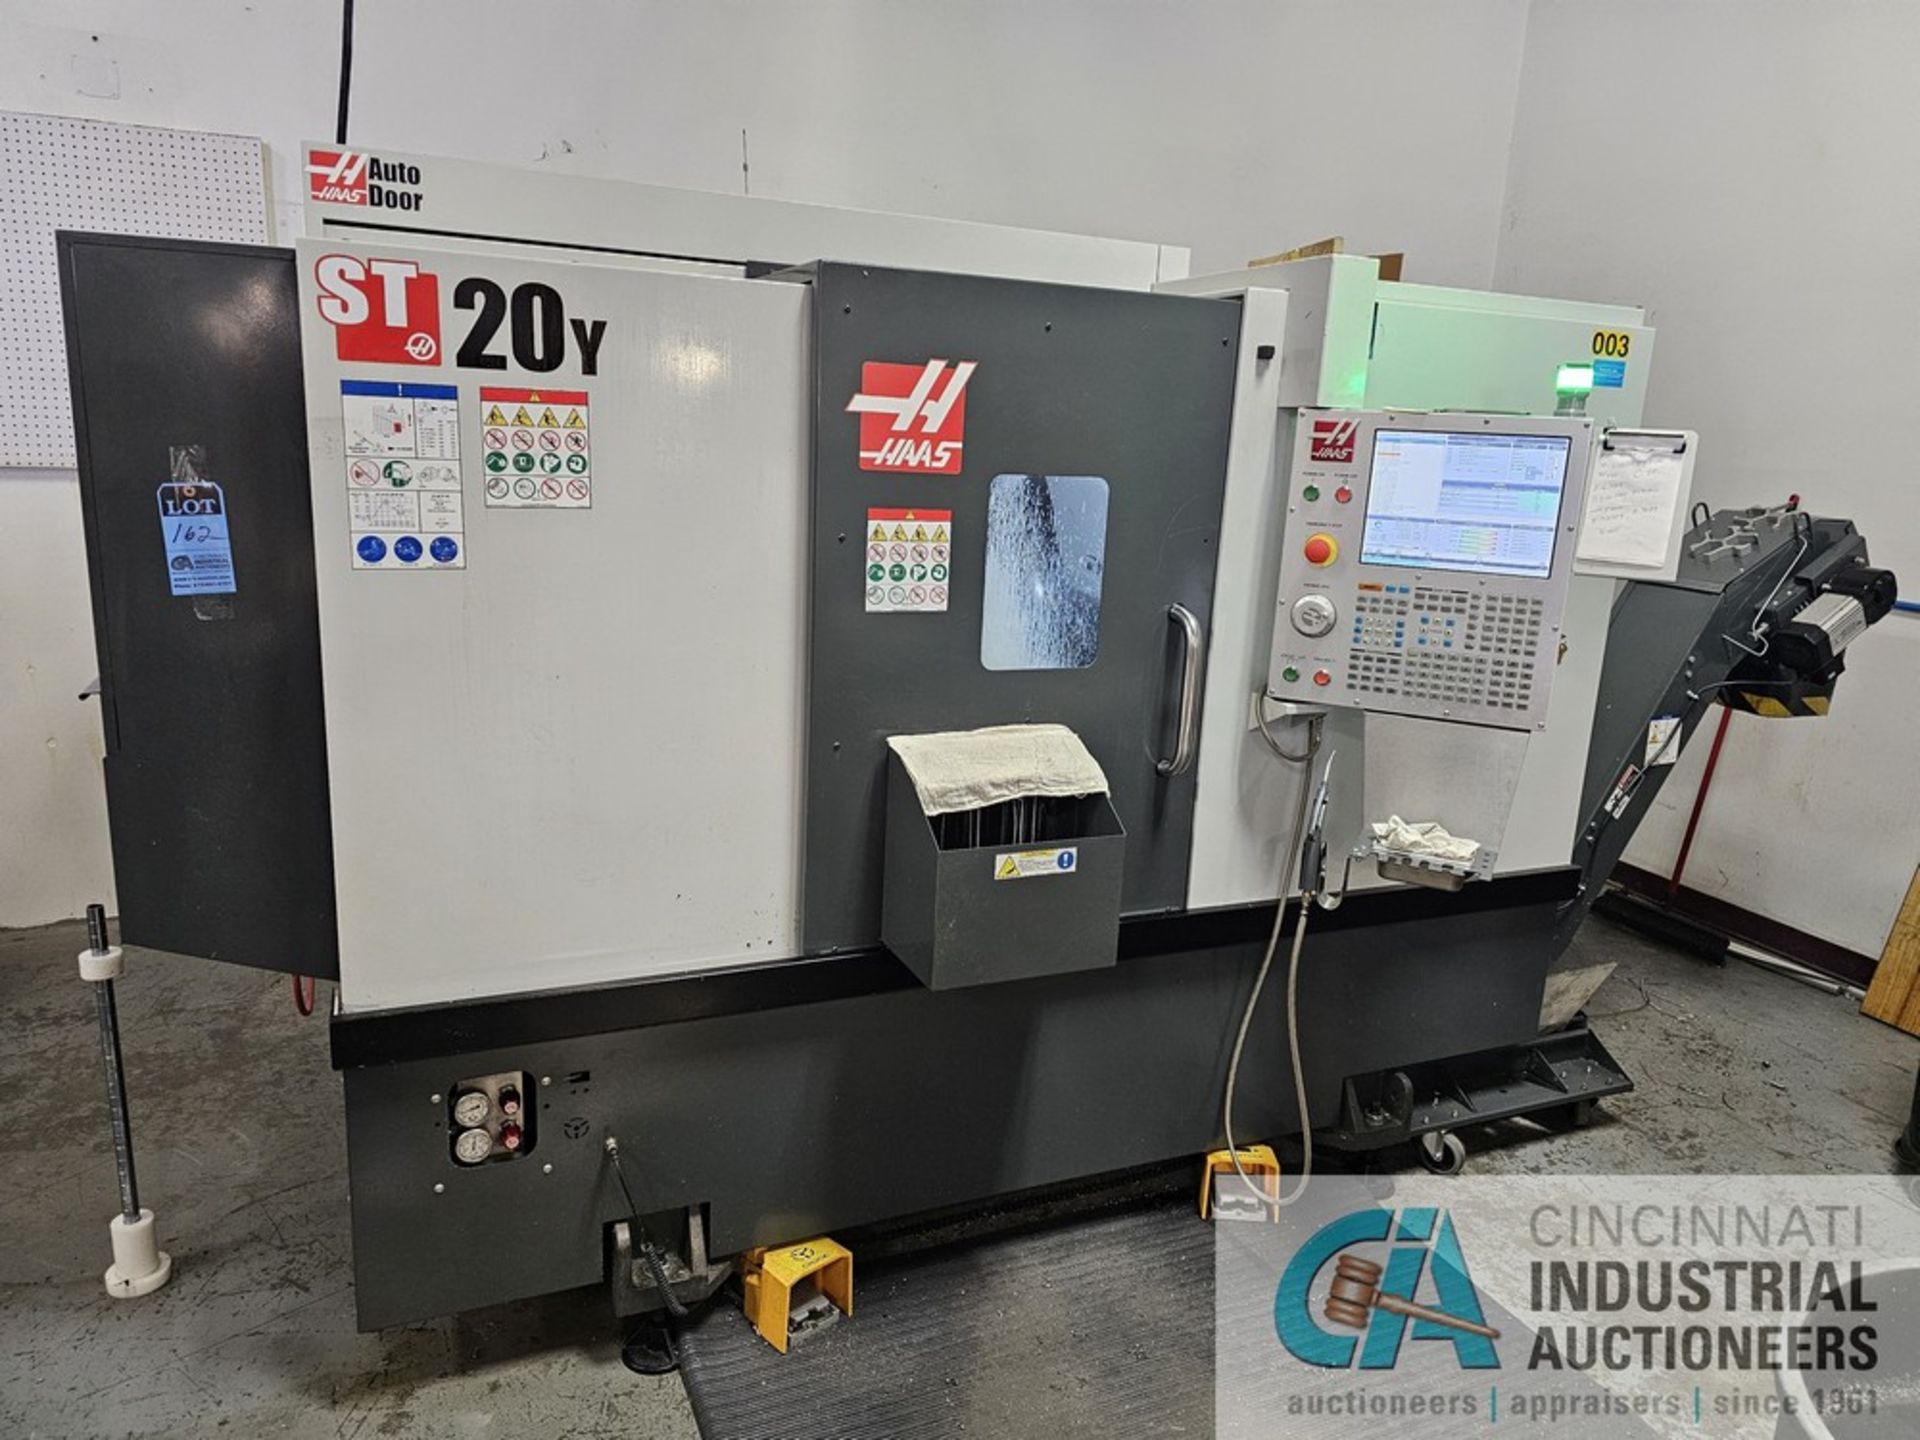 HAAS MODEL ST20Y CNC TURNING CENTER; S/N 3117597, 12-POSITION LIVE TOOLING CAPABILITY TURRET,